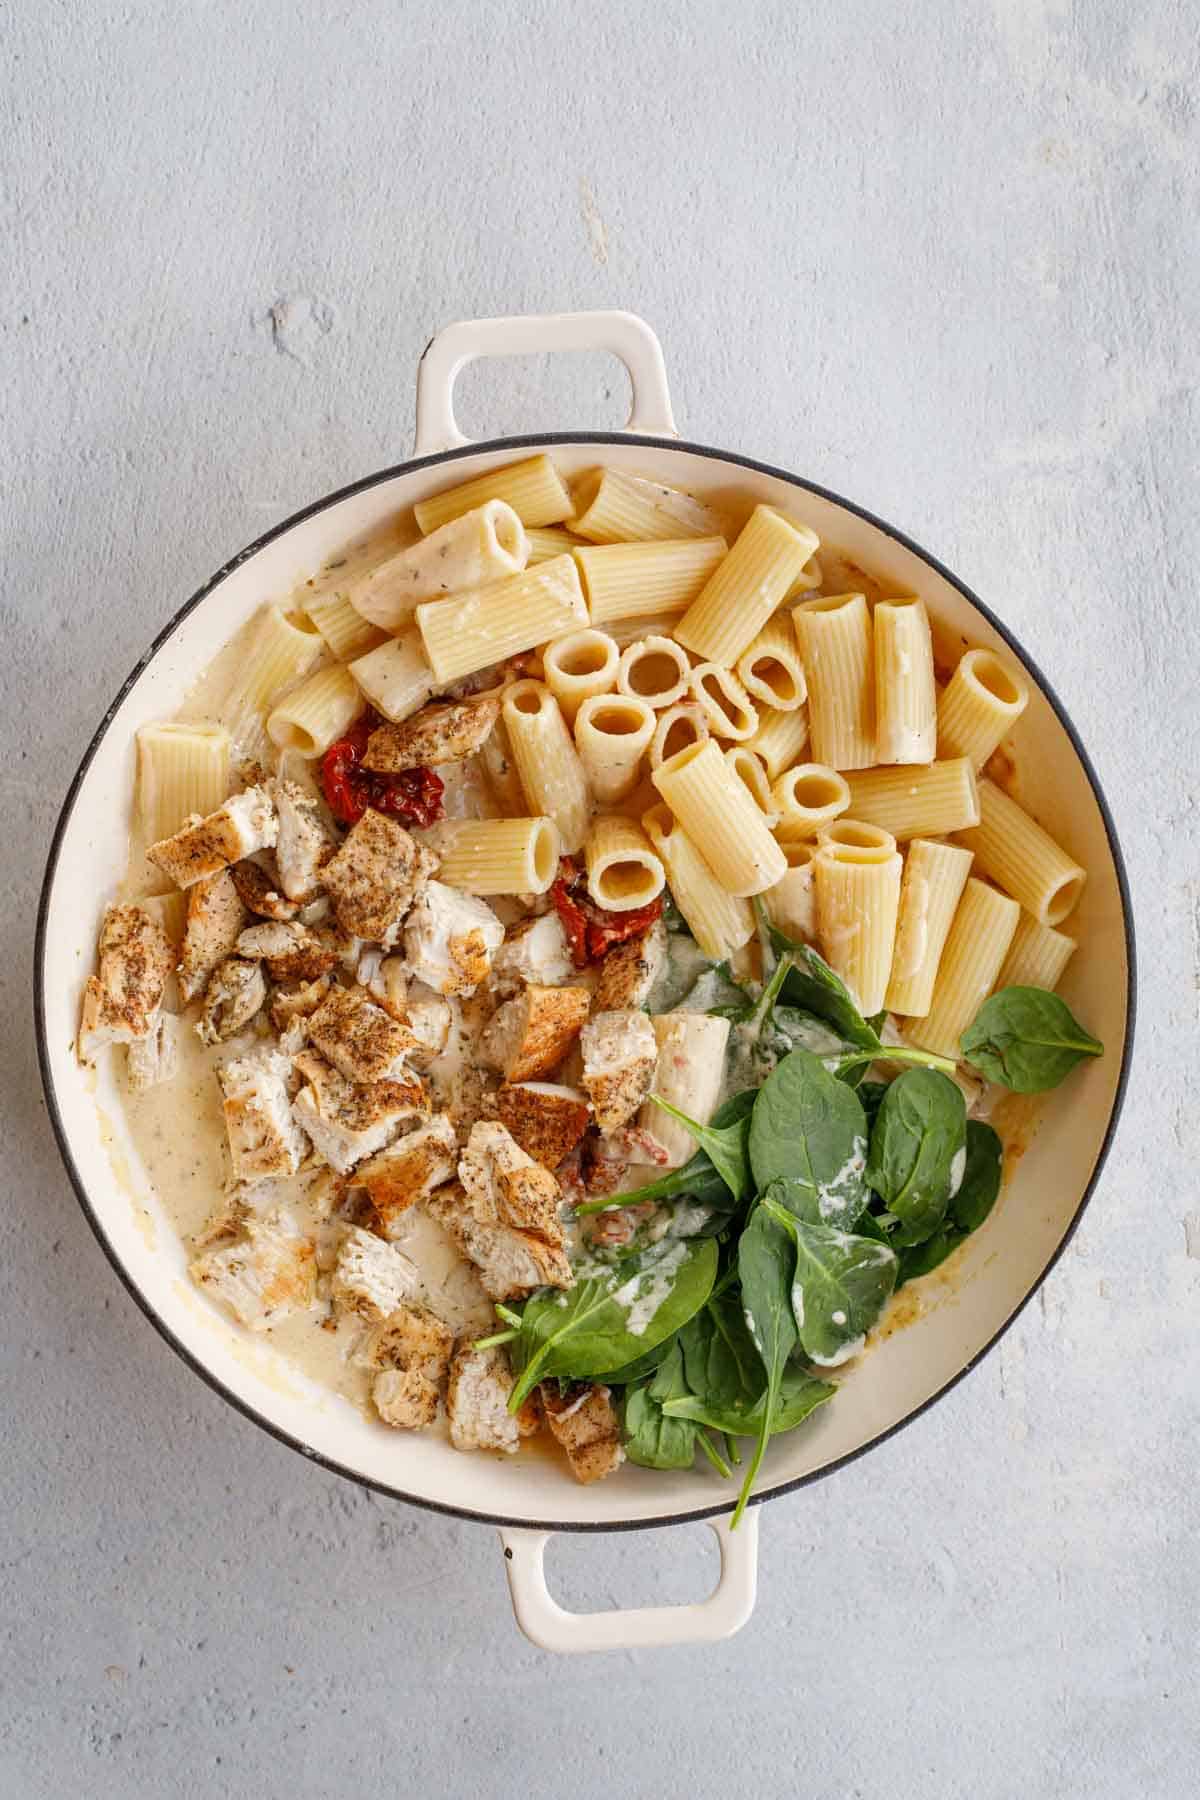 The pot with creamy tuscan sauce and the chicken, and pasta added to it.  